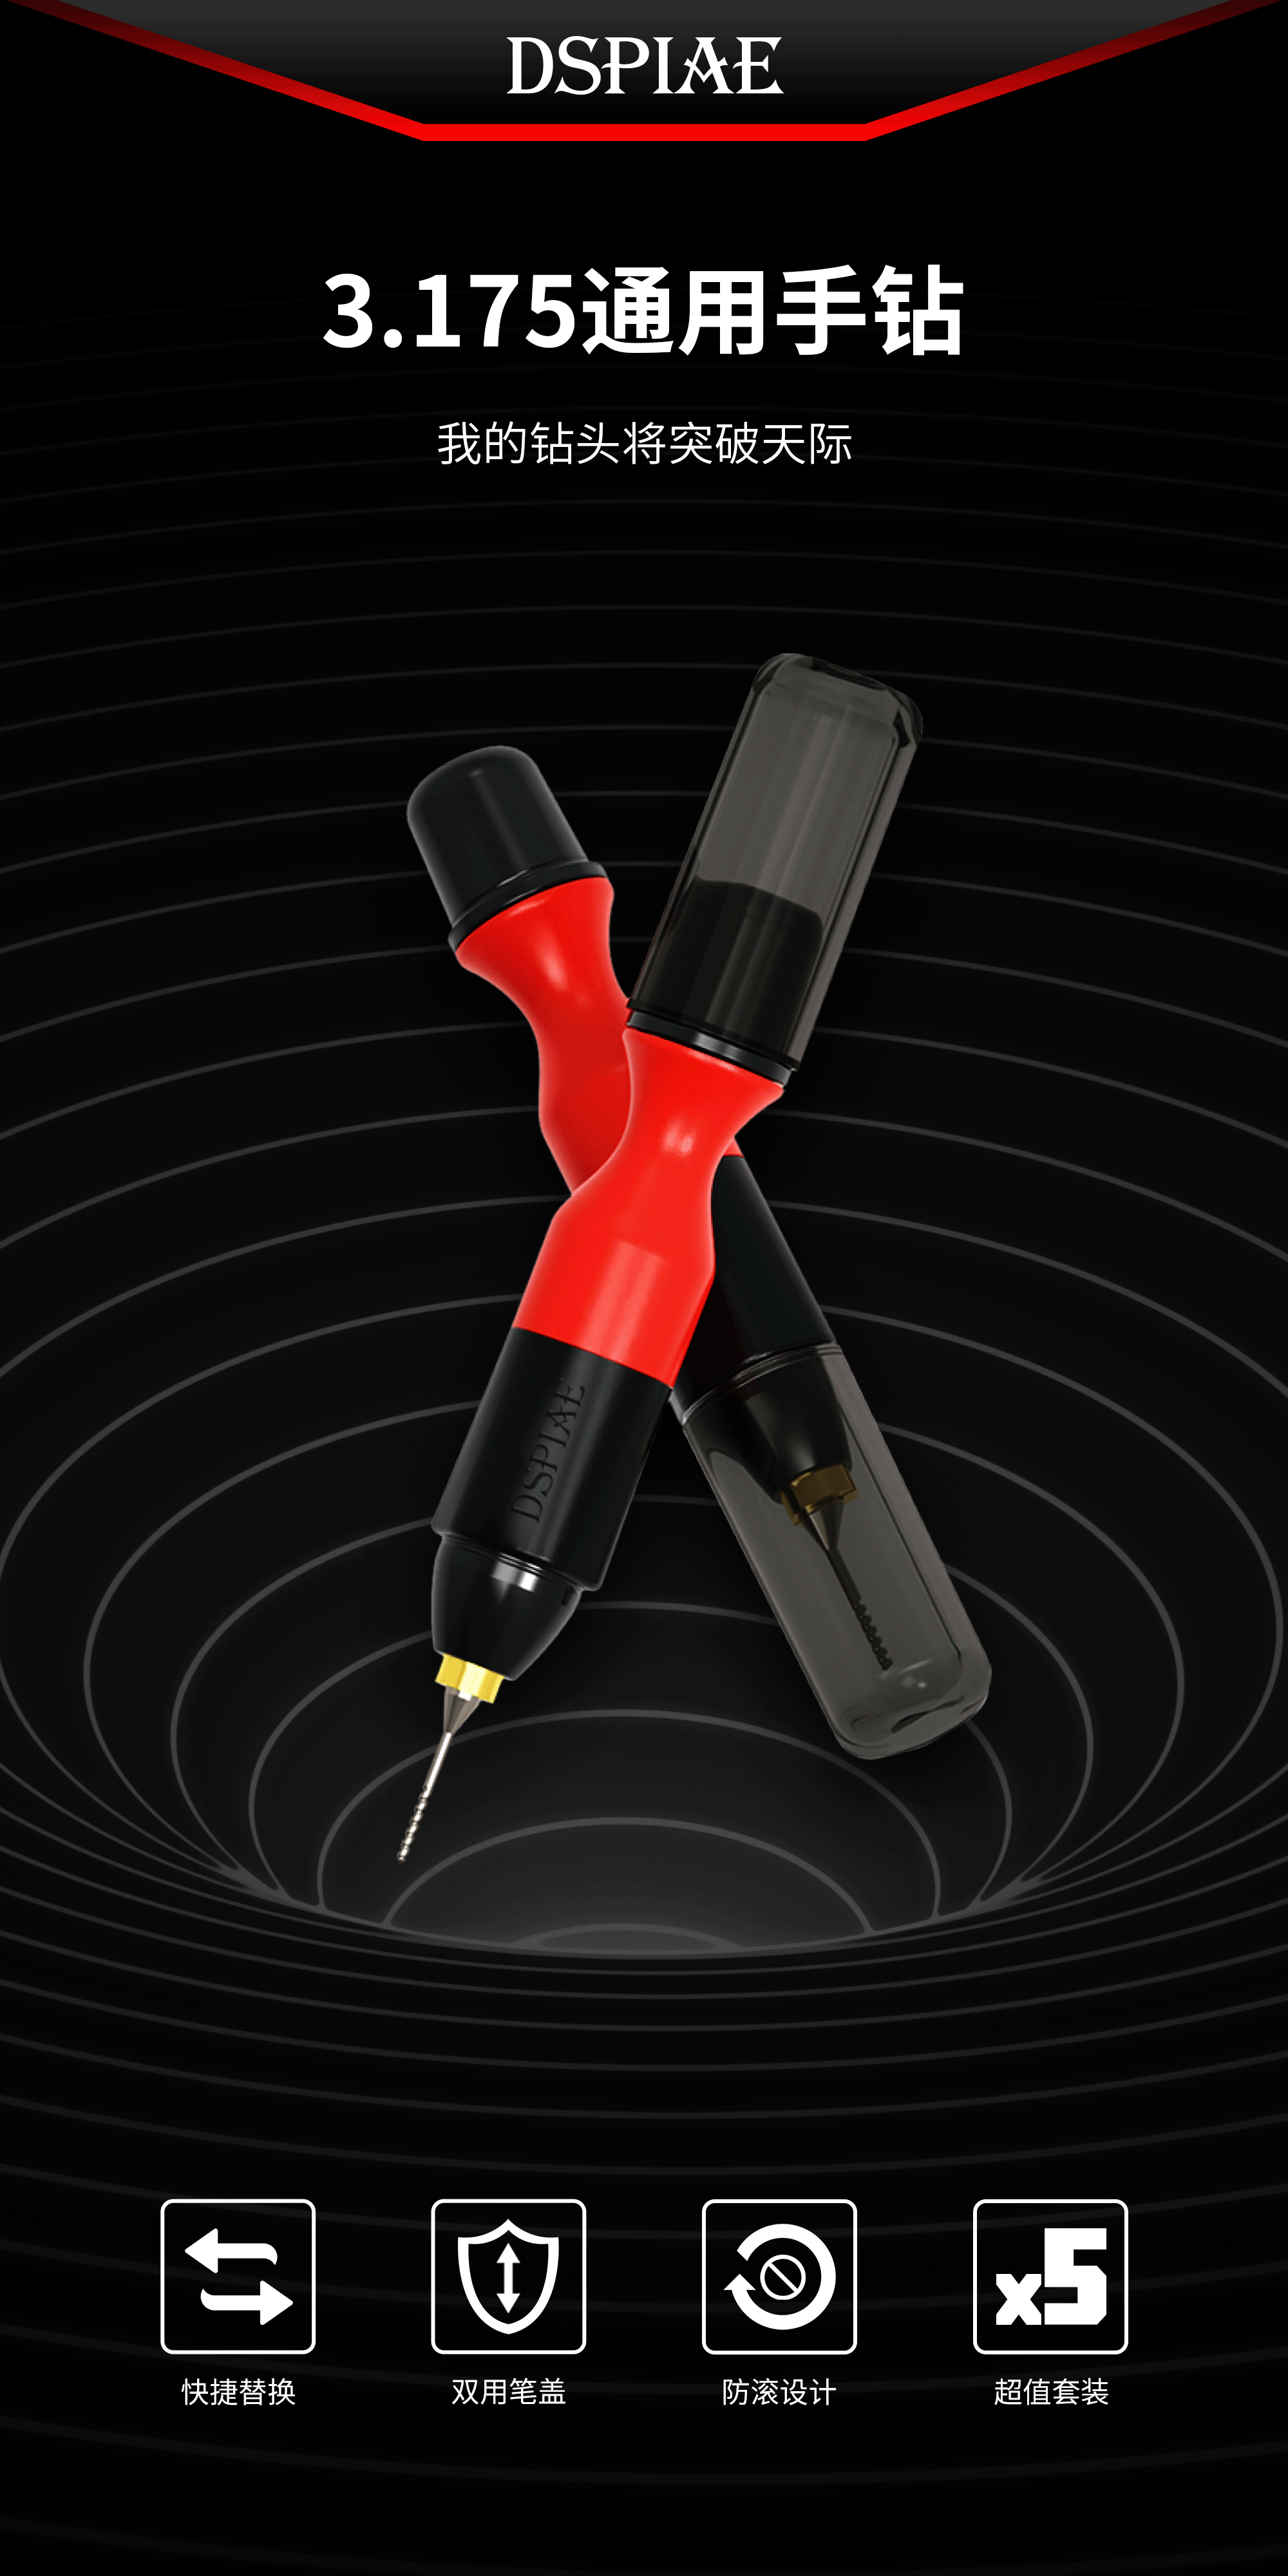 DSPIAE PT-HD 3.175mm General Purpose Hand Drill DIY Supplies Power Tool Pen Type Mini with 0.5/0.8/1.0/1.5/2.0 mm Machine Drill